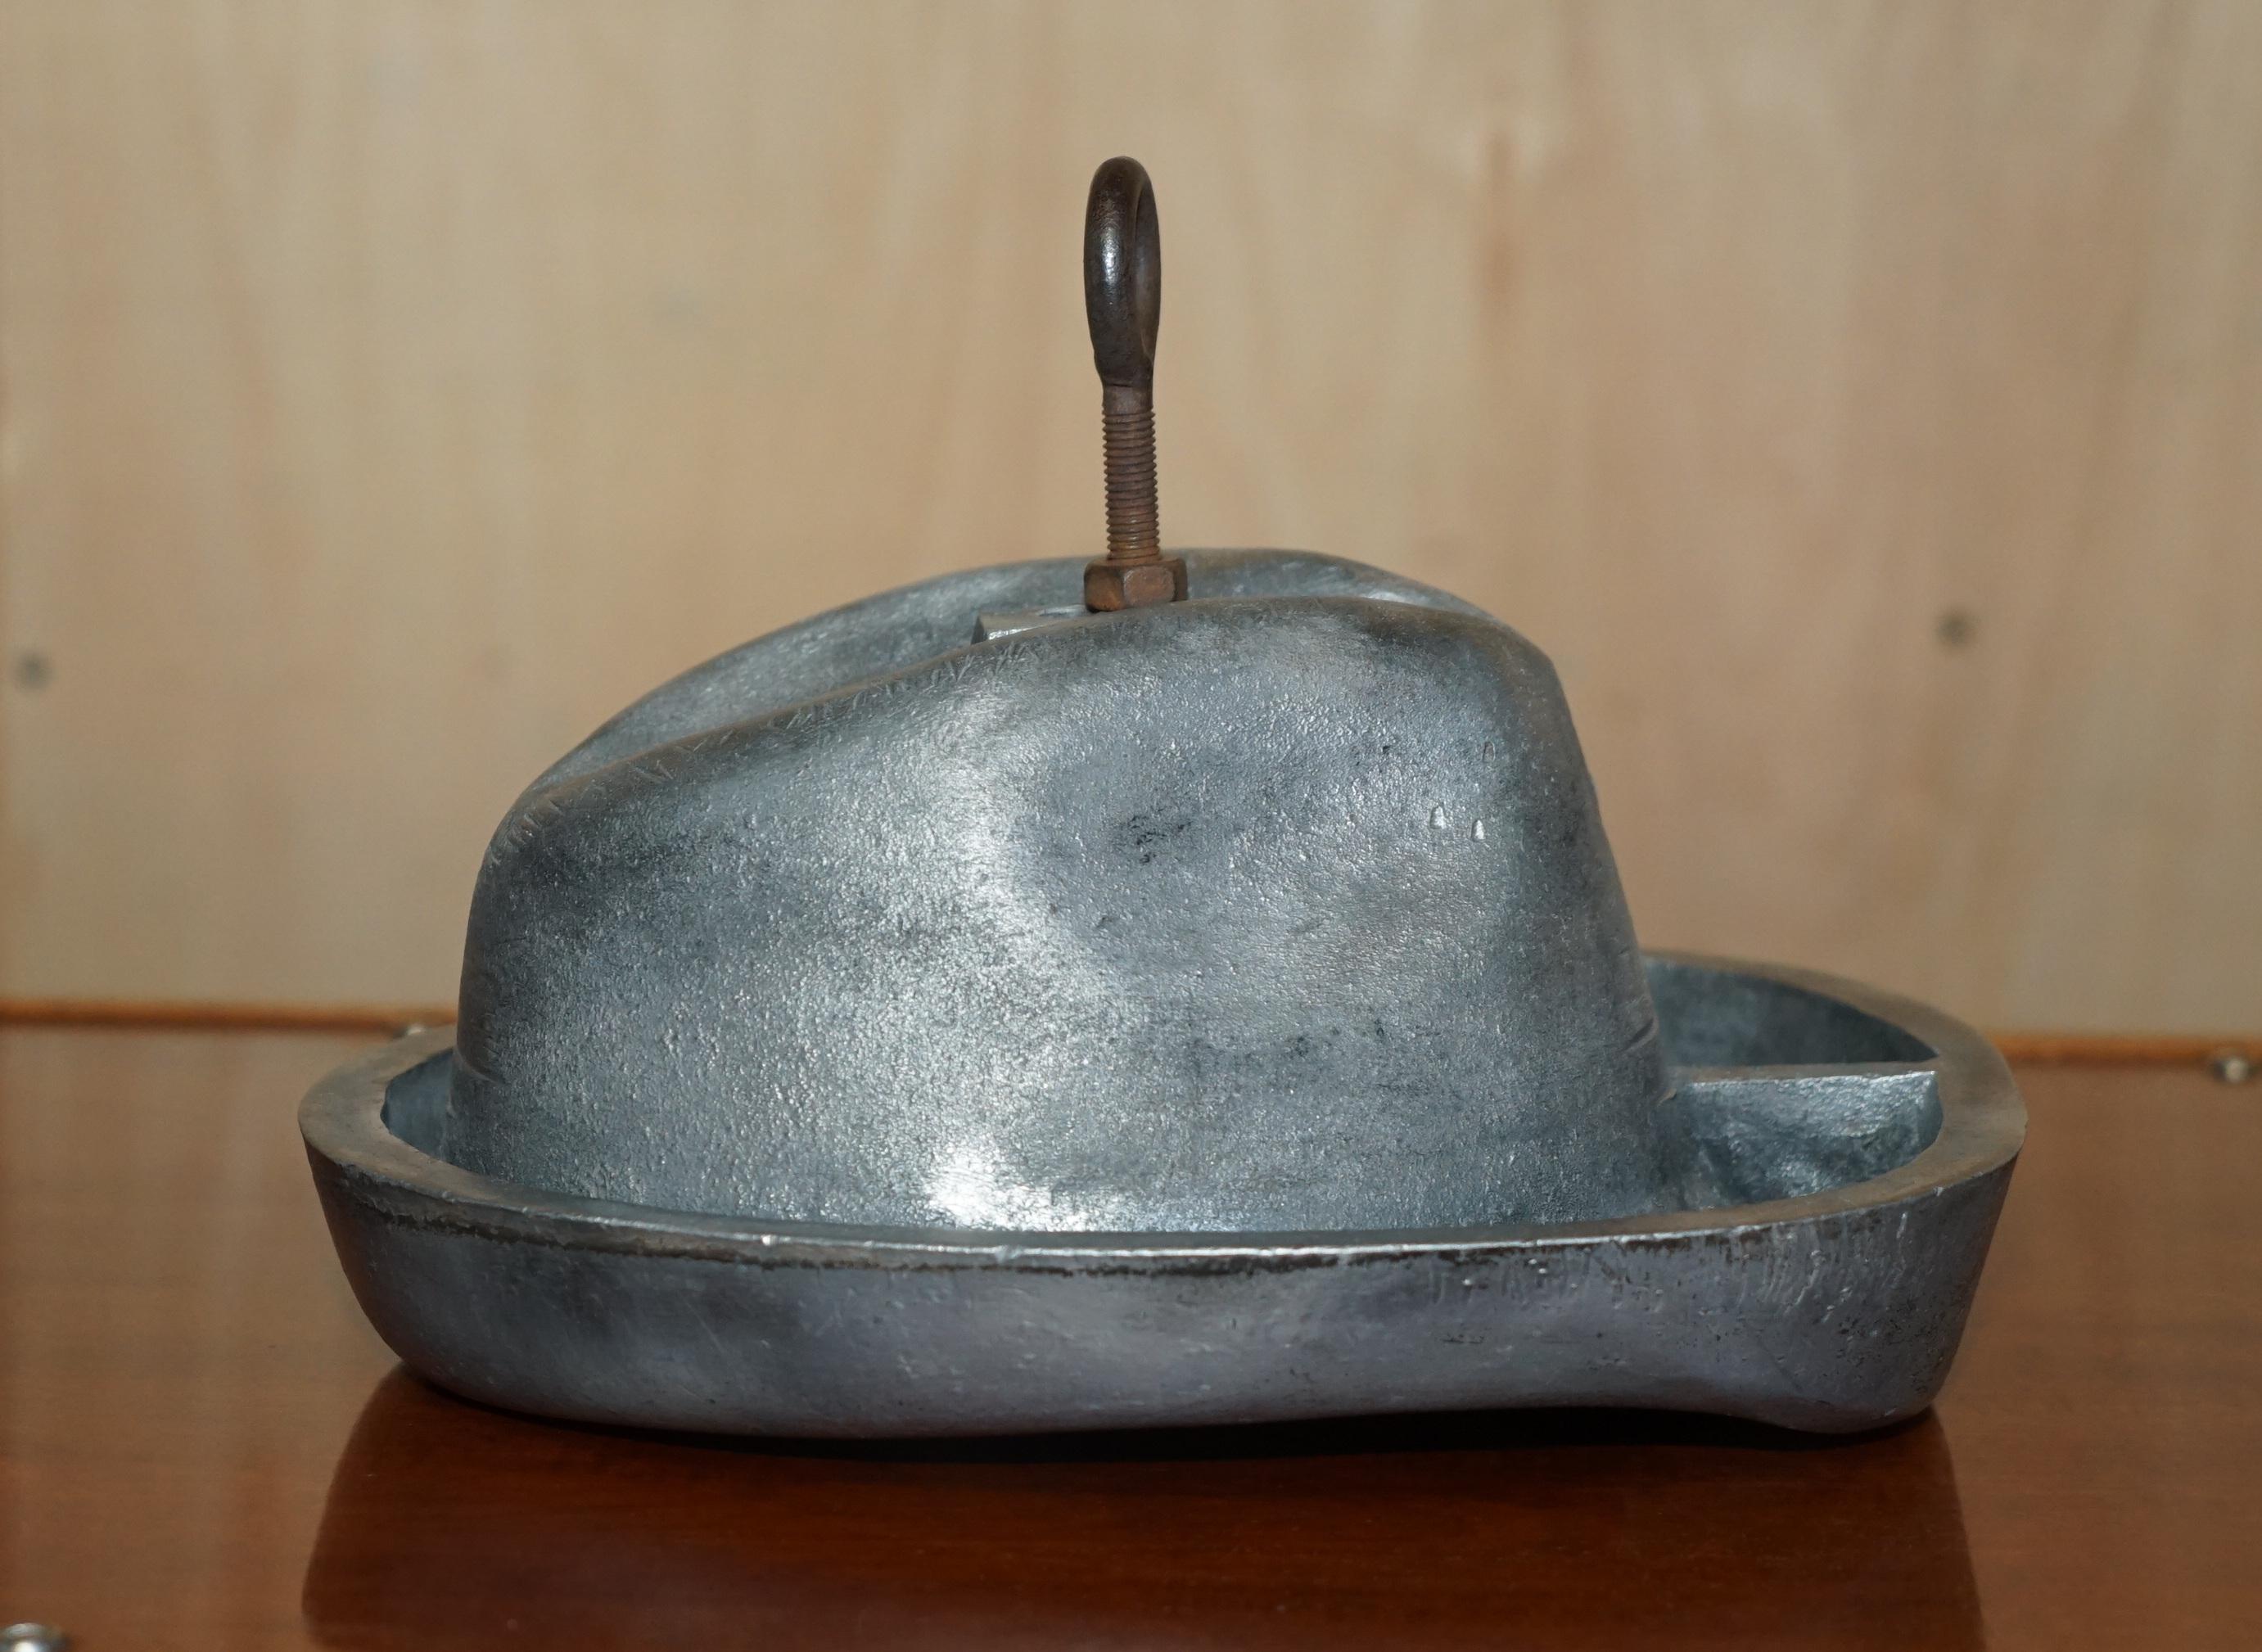 Royal House Antiques

Royal House Antiques is delighted to offer for sale this original Art Deco Trilby hat Mold circa 1920’s

A good looking well made and decorative table mounted piece, this is the only example I have ever seen with the original